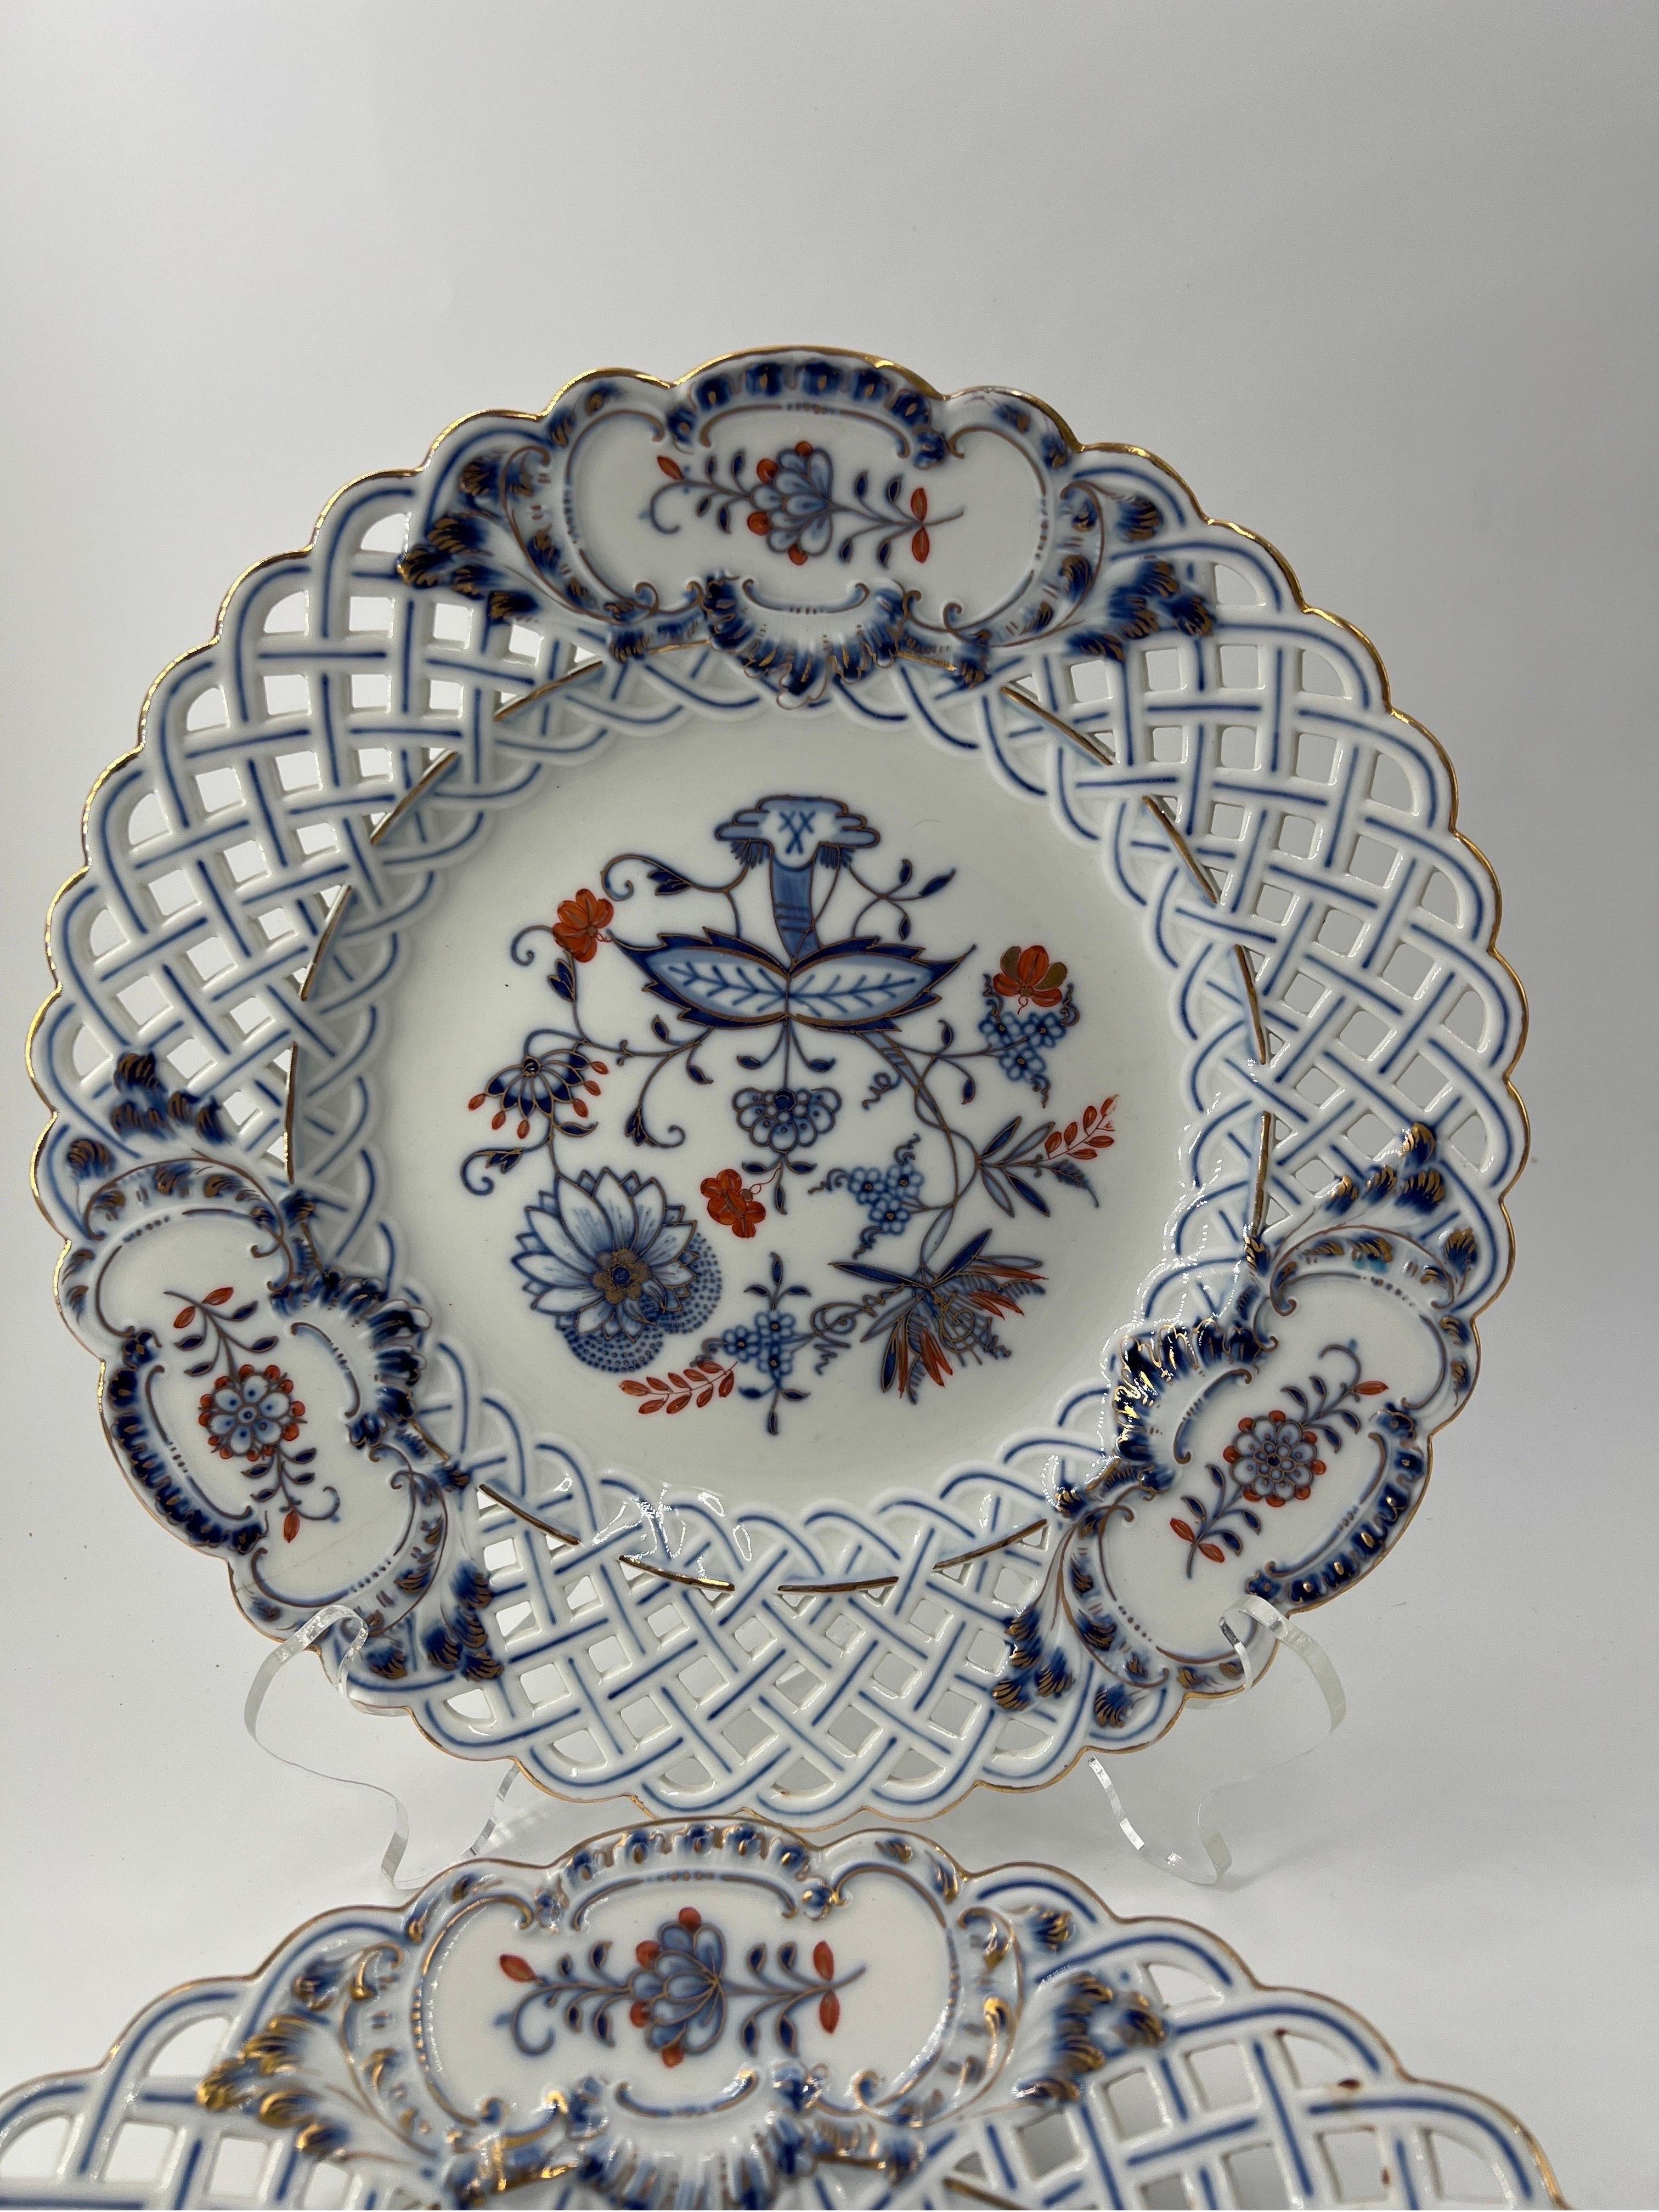 A beautiful pair of 11.25” Meissen porcelain plates in the rich blue onion pattern. The plates feature a fine reticulated border, floral decoration to center and marked to verso.